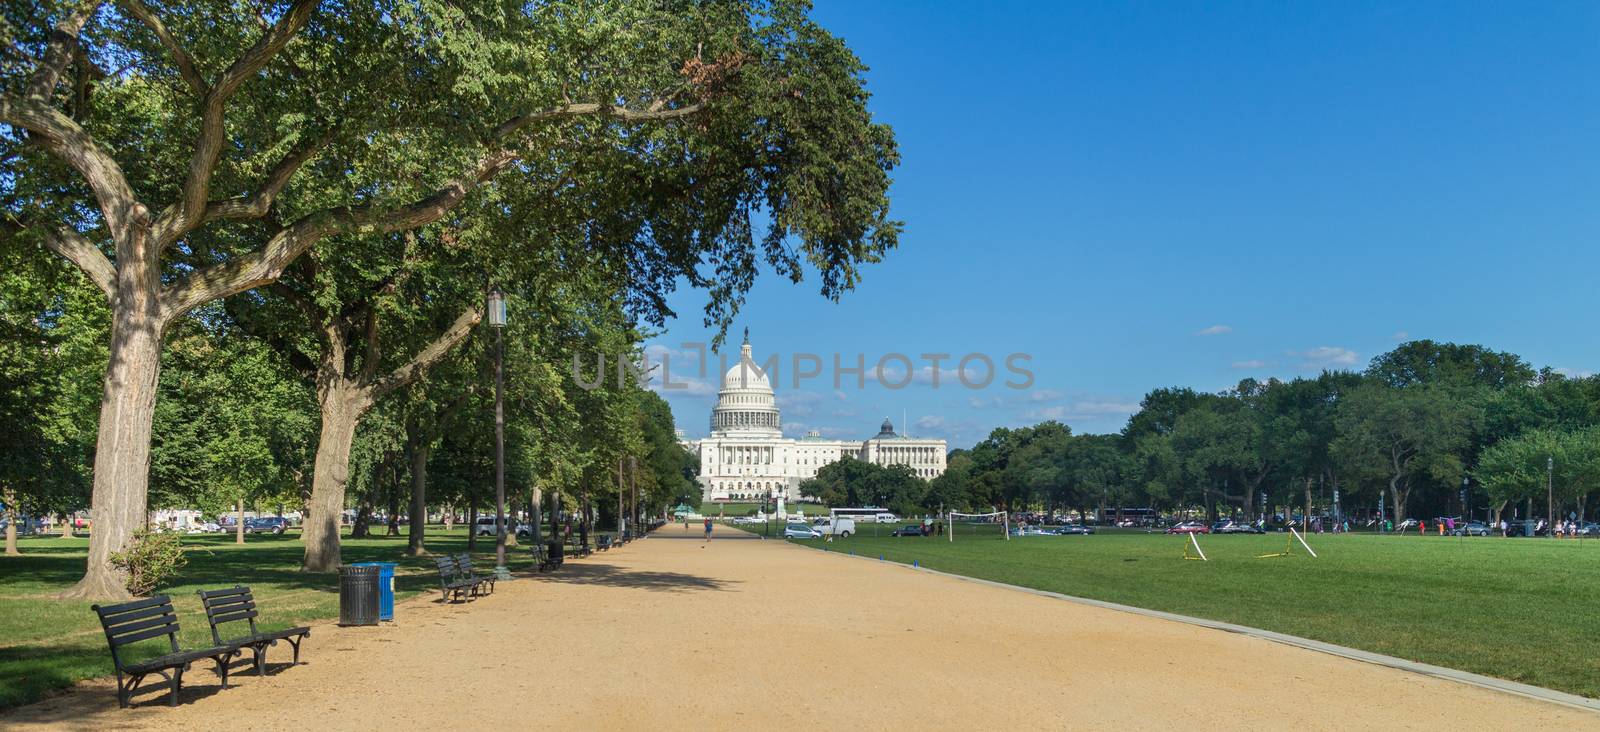 US Capitol Building  by derejeb